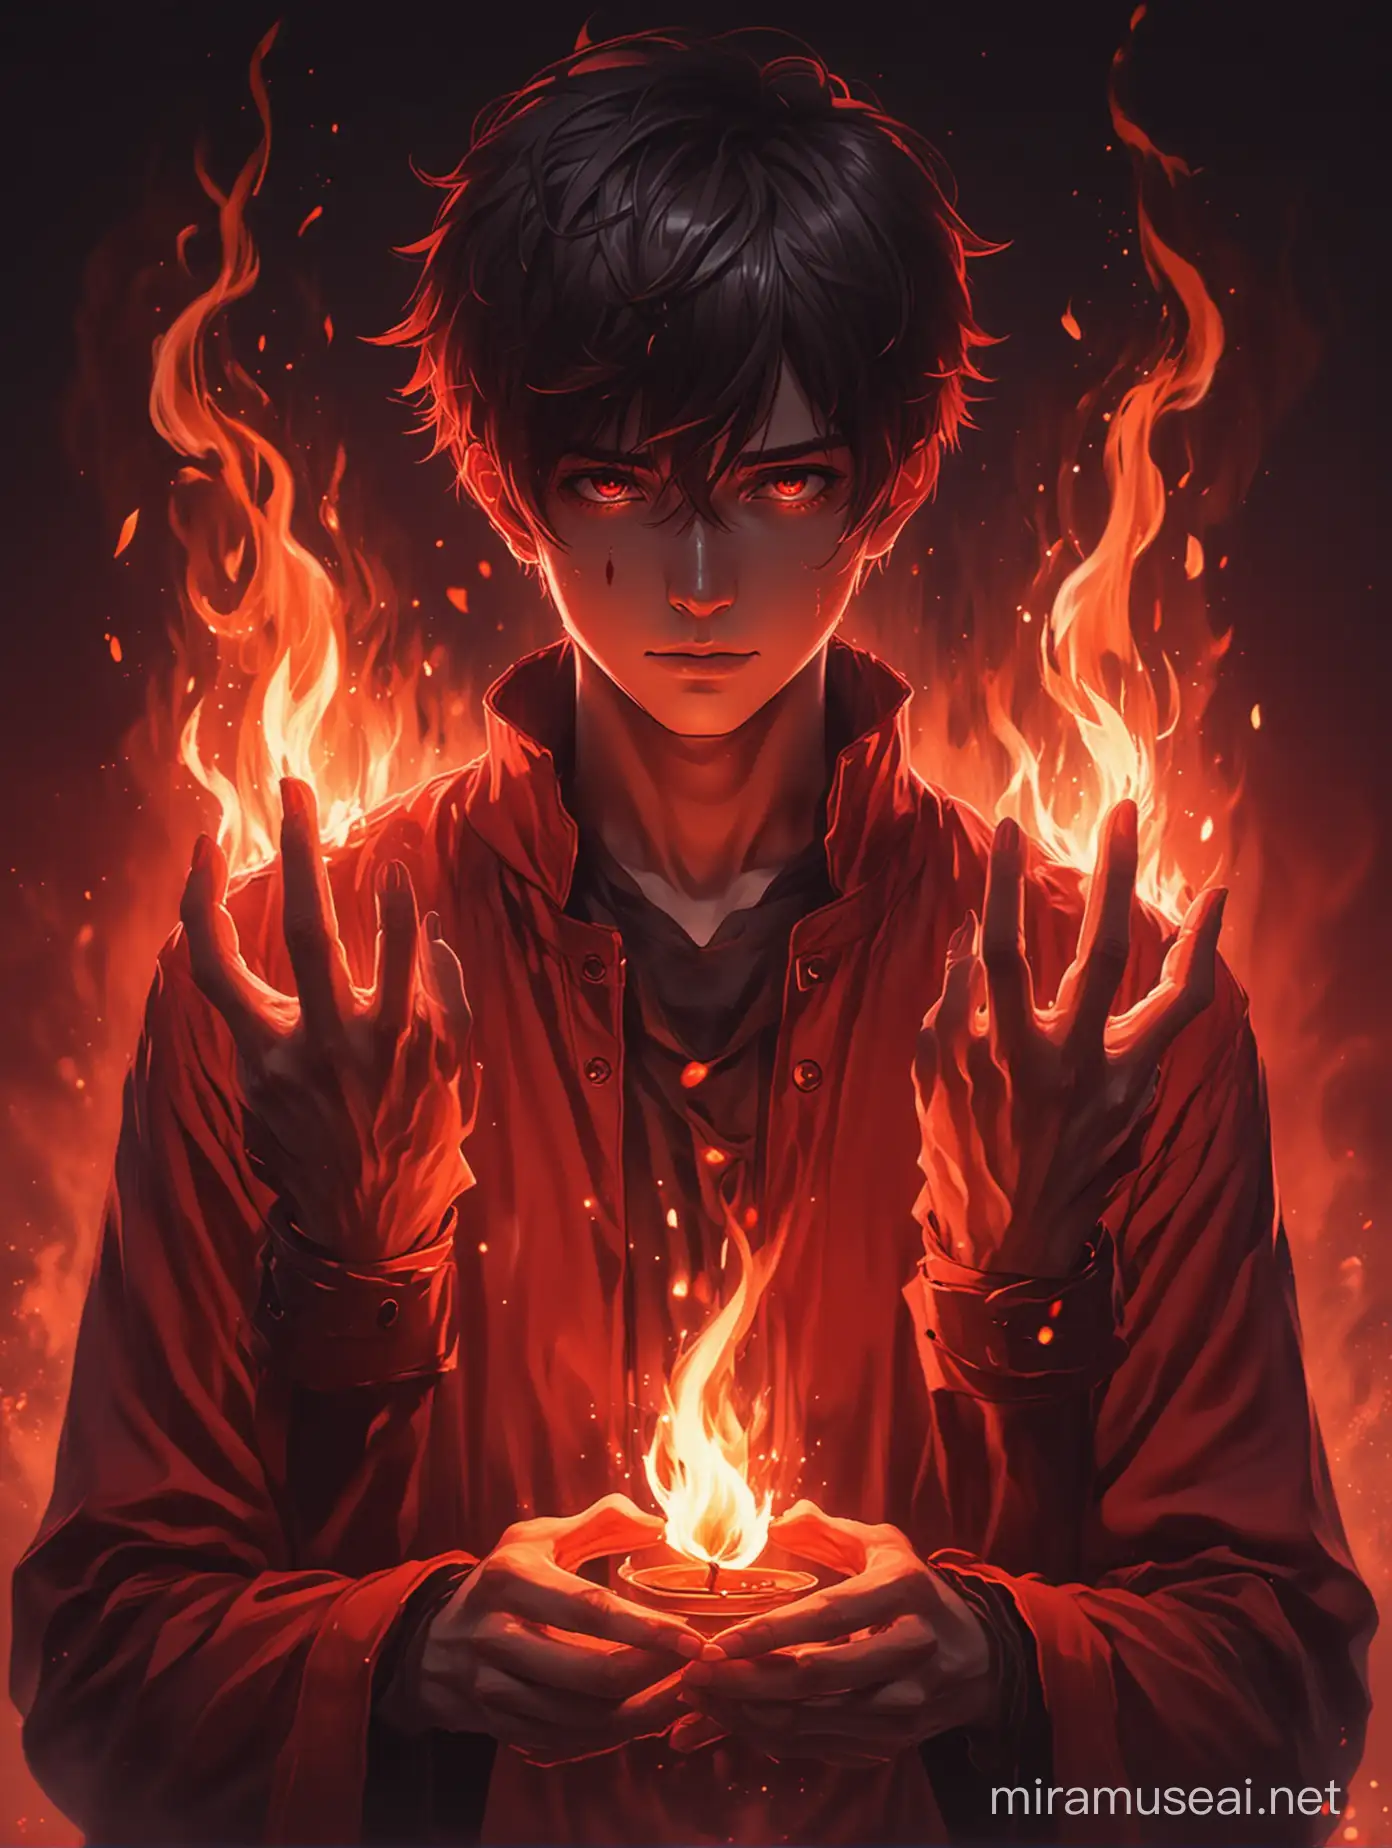 Mysterious Anime Character Embracing Dark Love in Crimson Flames